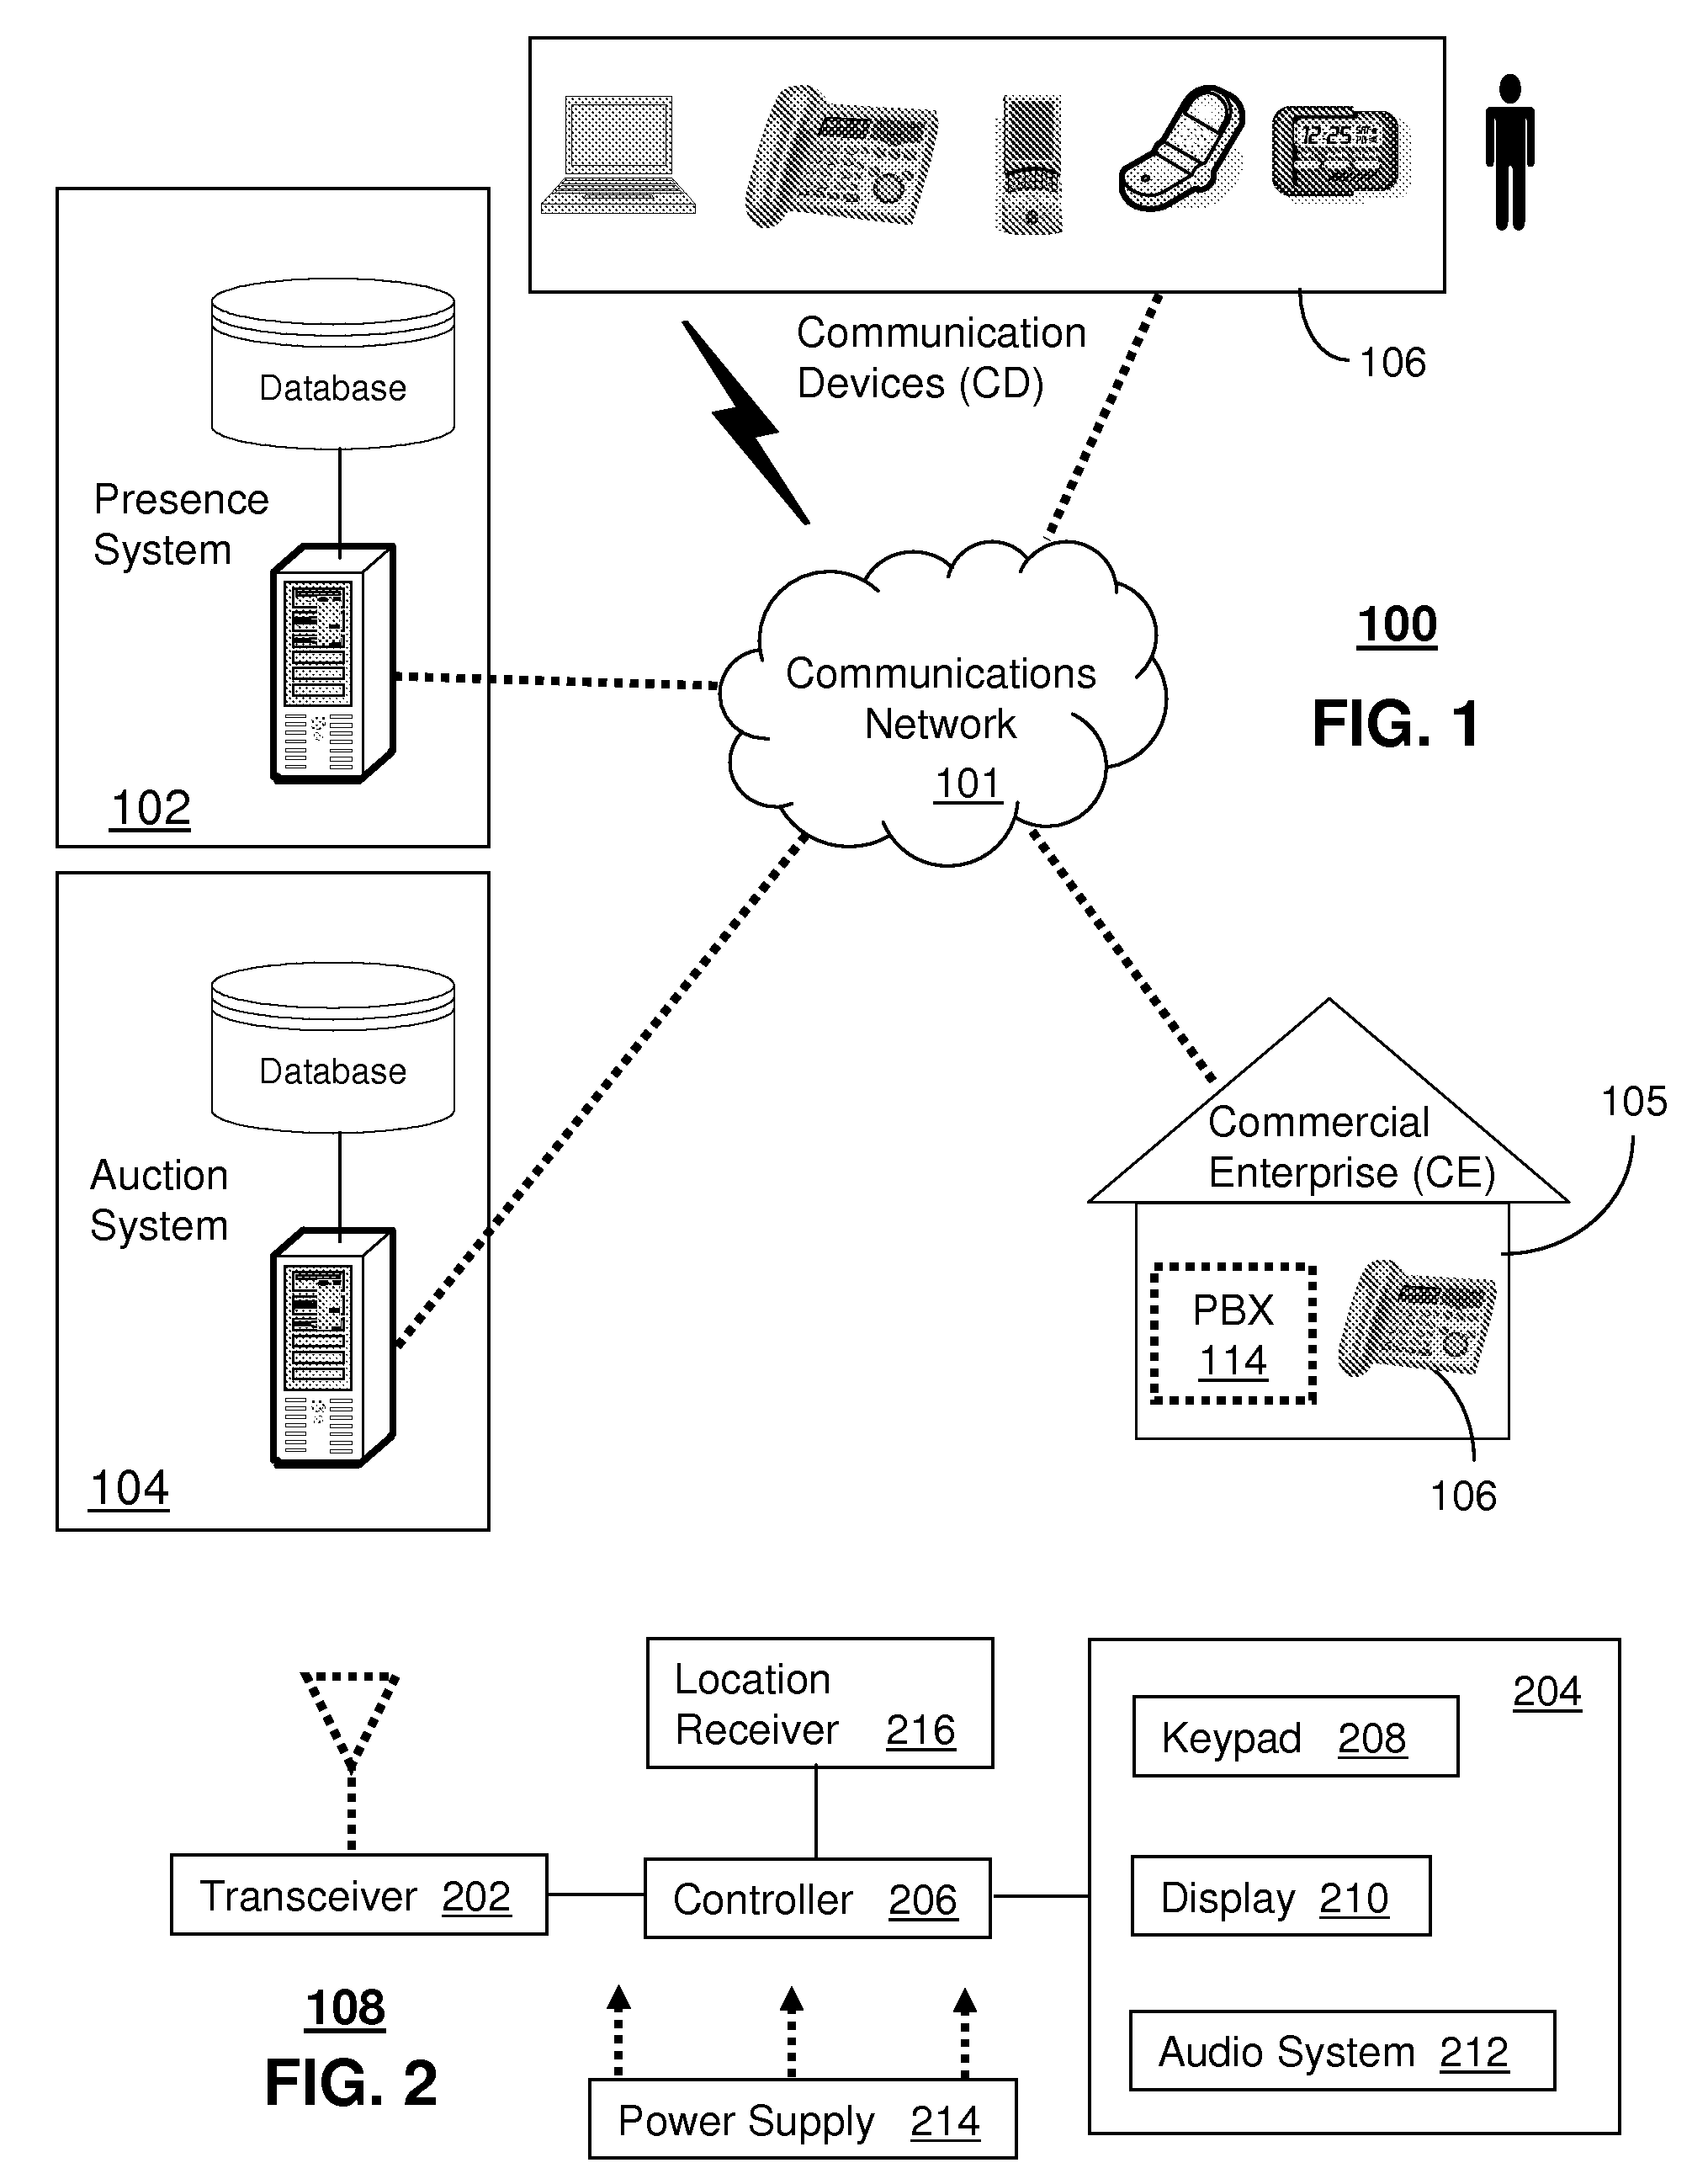 System and method for reverse auctioning